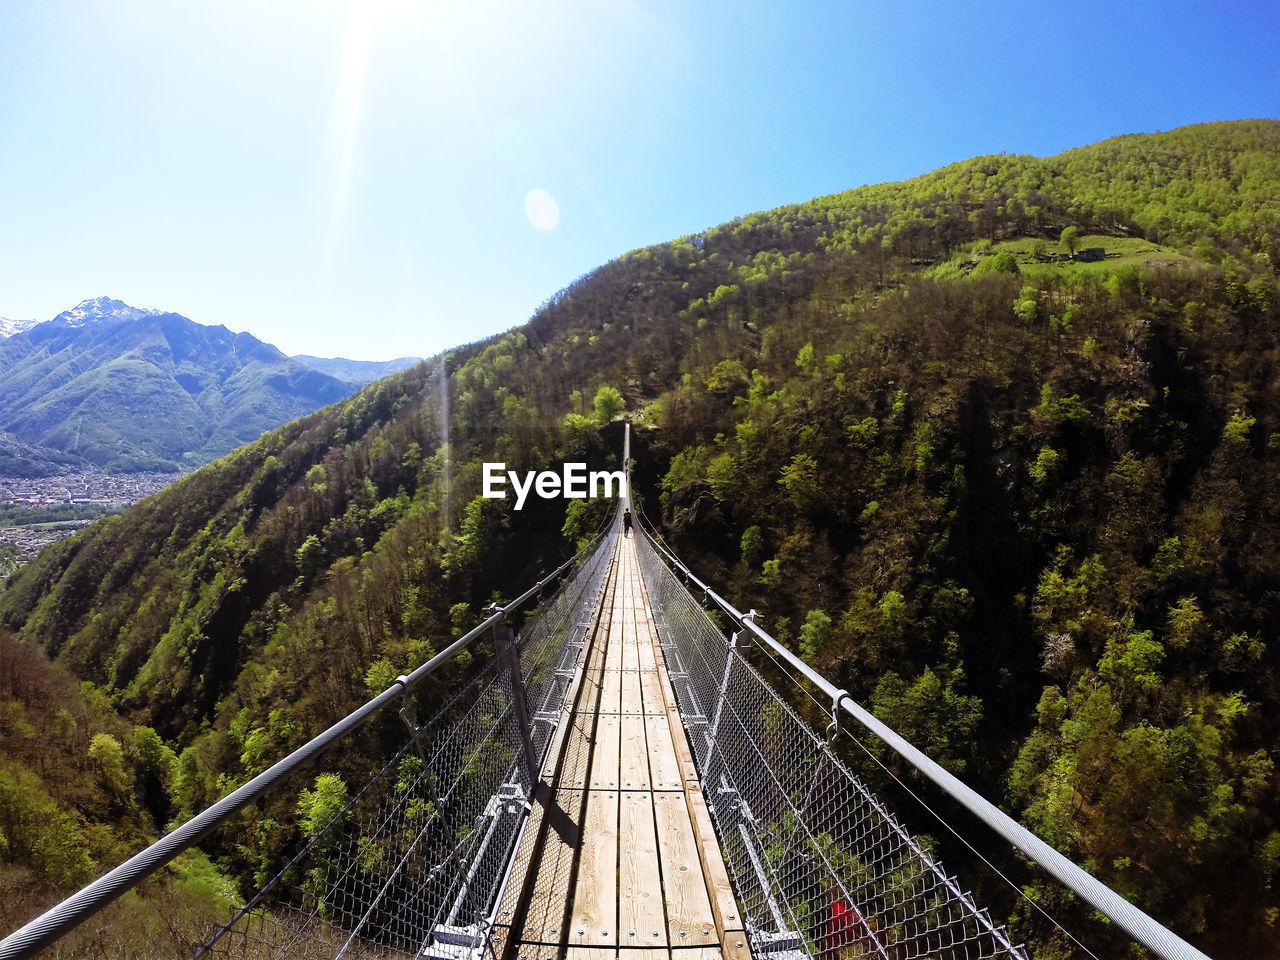 Dramatic tibetan bridge suspended 426 ft. above a forested mountain gorge with scenic views.